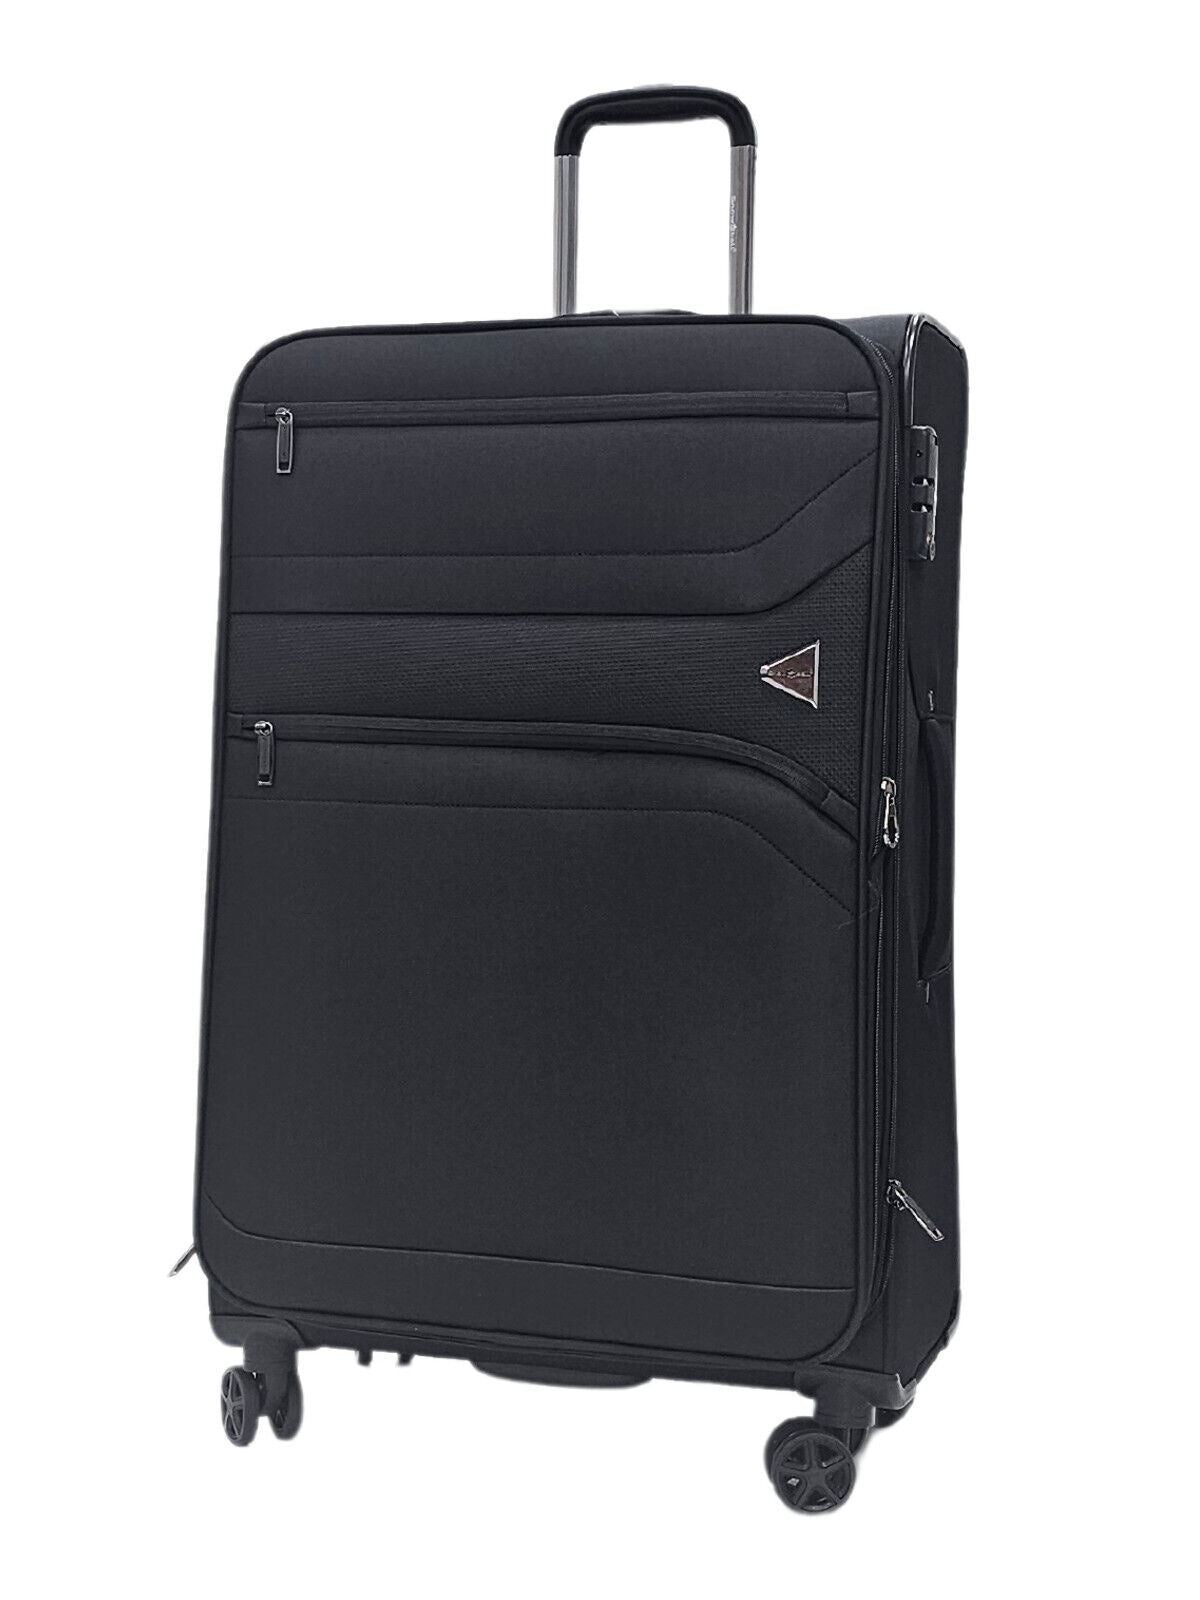 Lightweight Soft  Dual 4 Wheel Luggage Suitcases